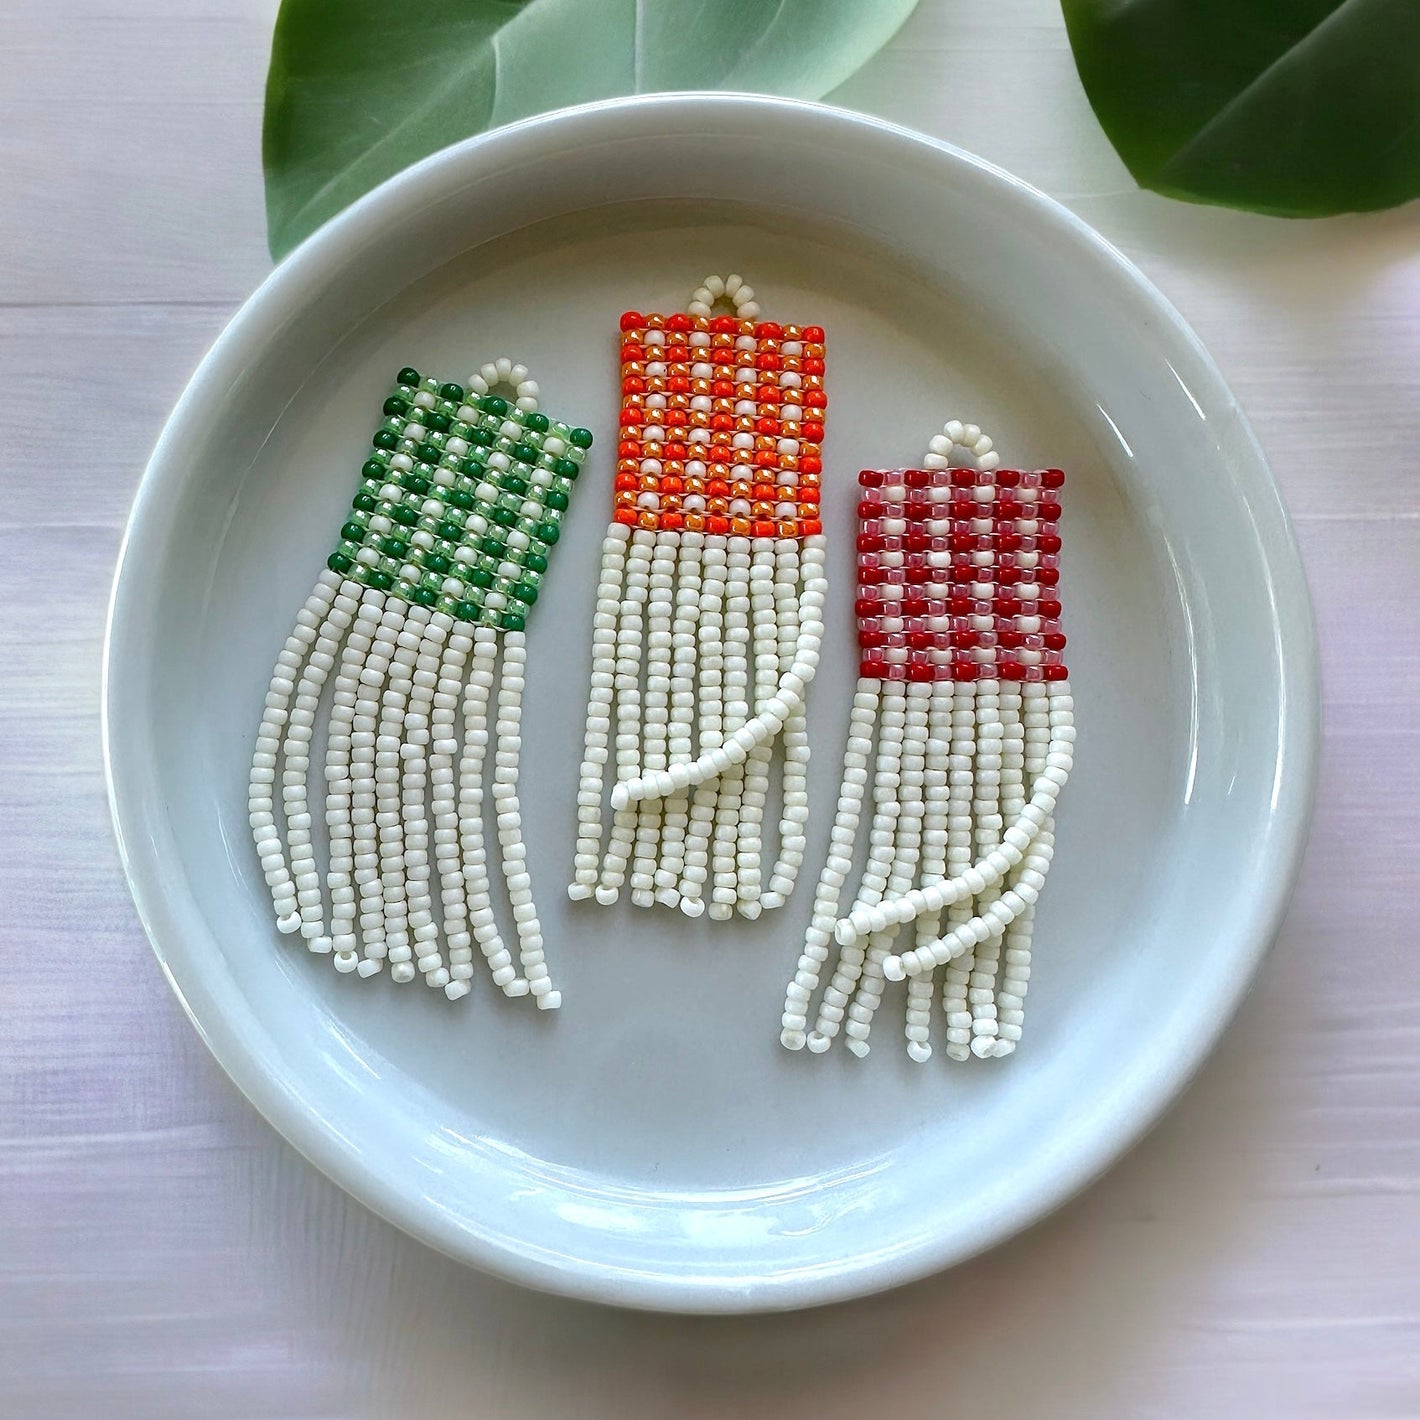 Set of three beaded fringe earrings with a red, green, and orange gingham pattern in white circular ceramic dish on a white cloth background